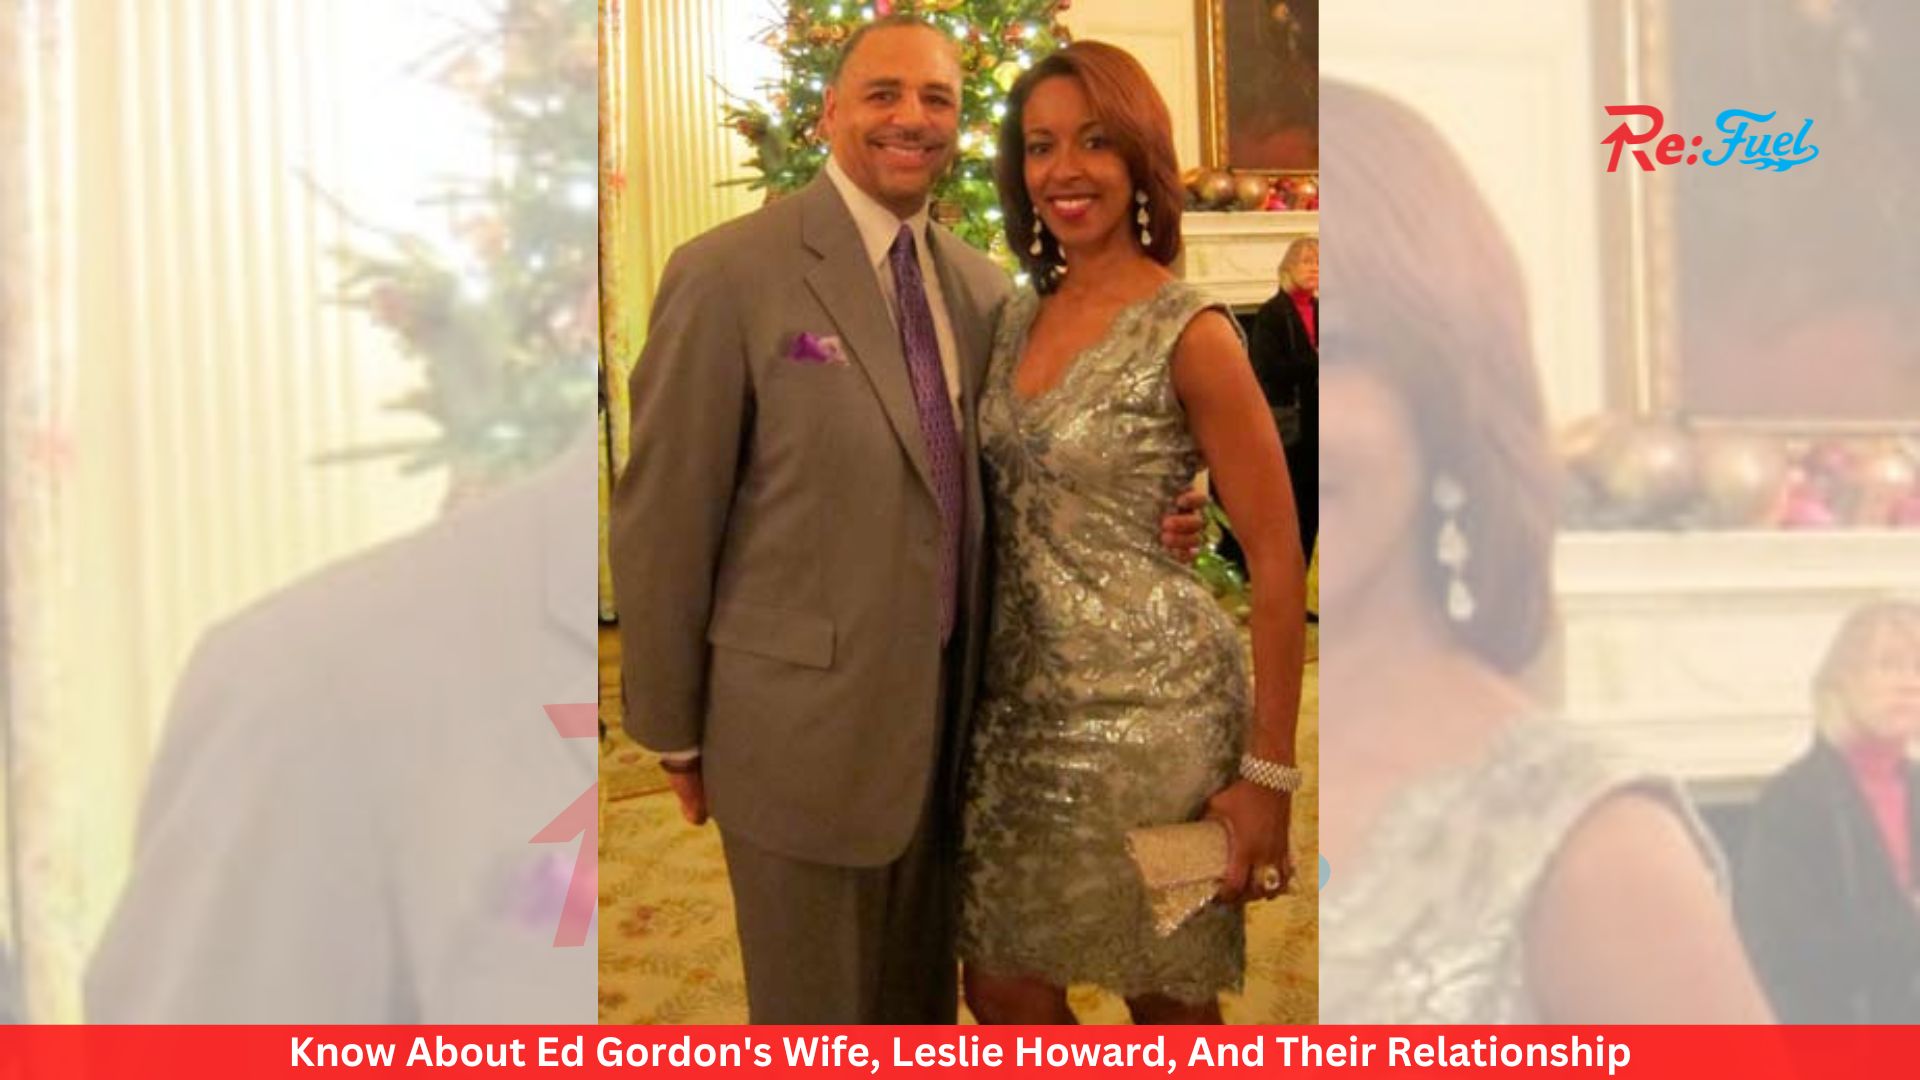 Know About Ed Gordon's Wife, Leslie Howard, And Their Relationship